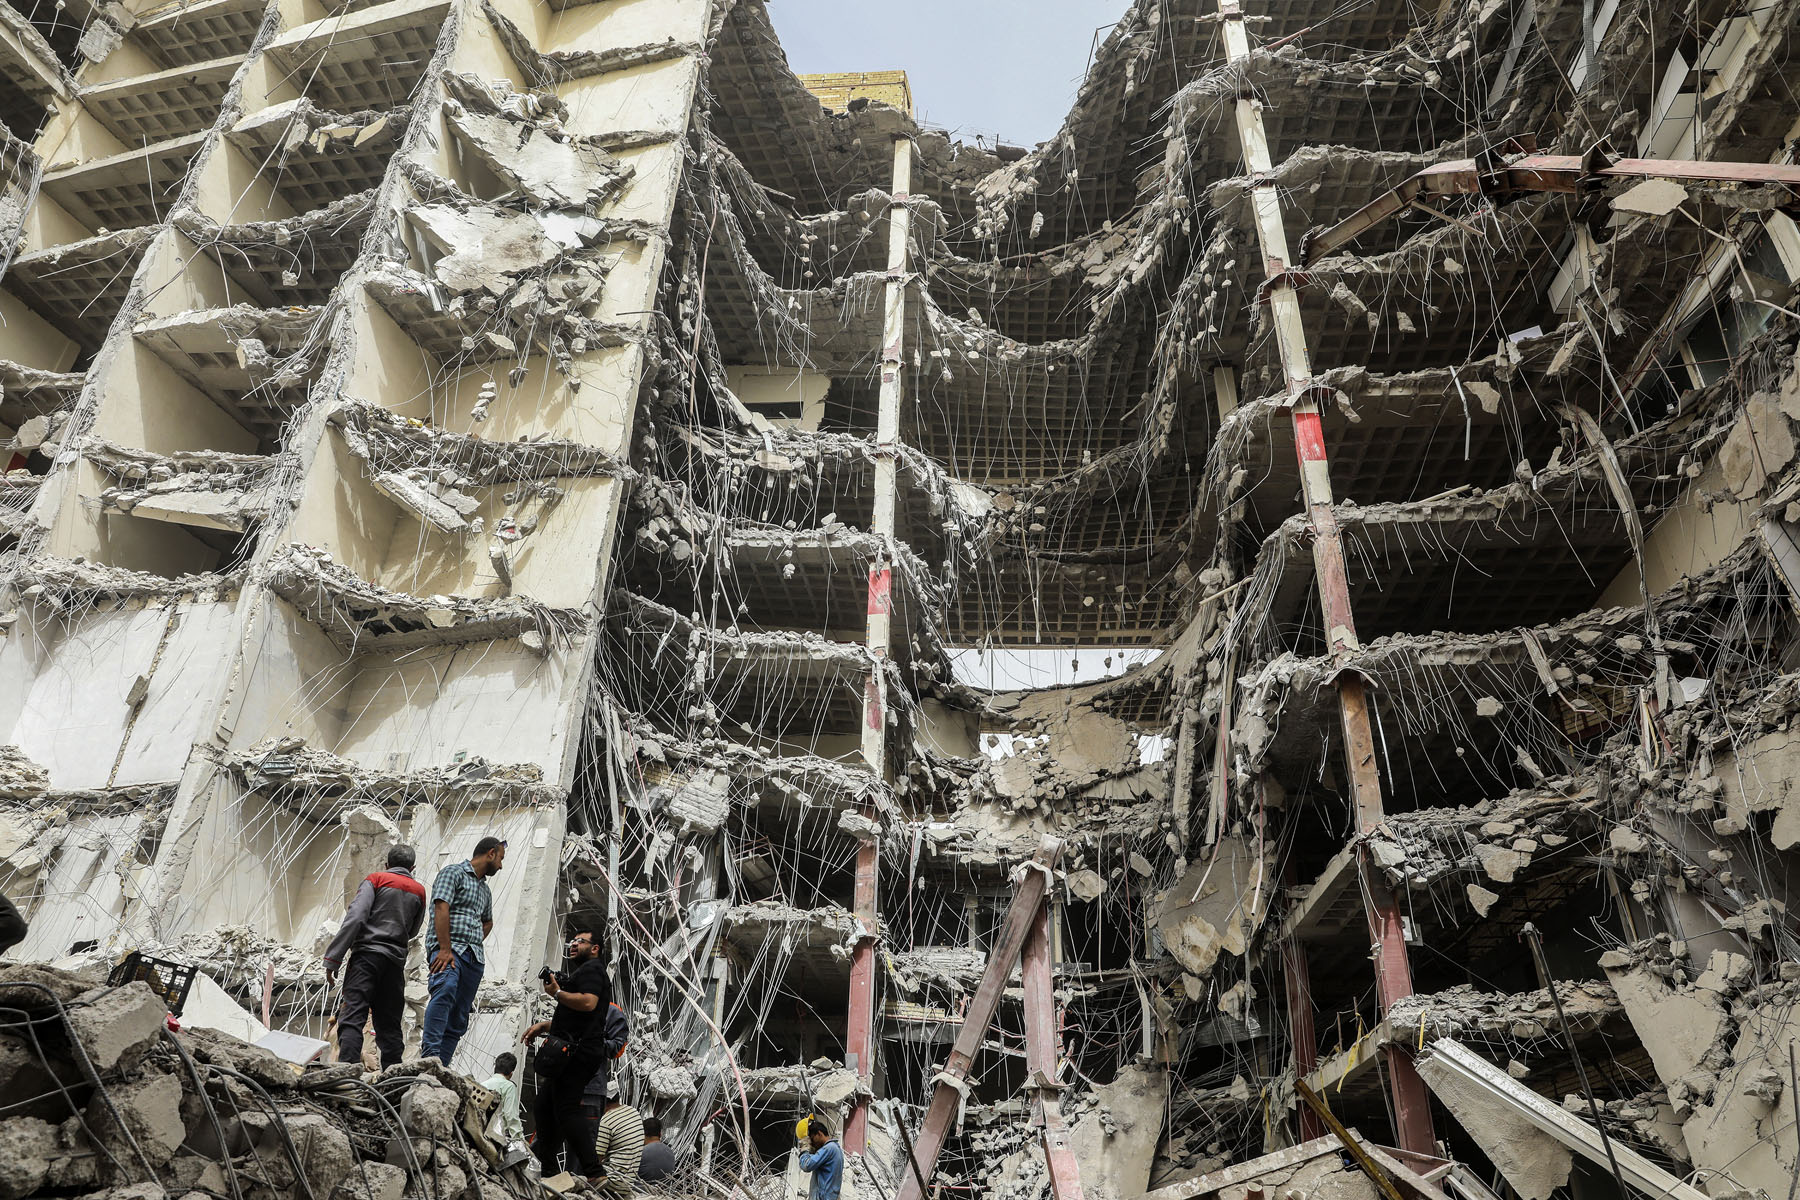 Building collapse in Iran kills 11, many trapped